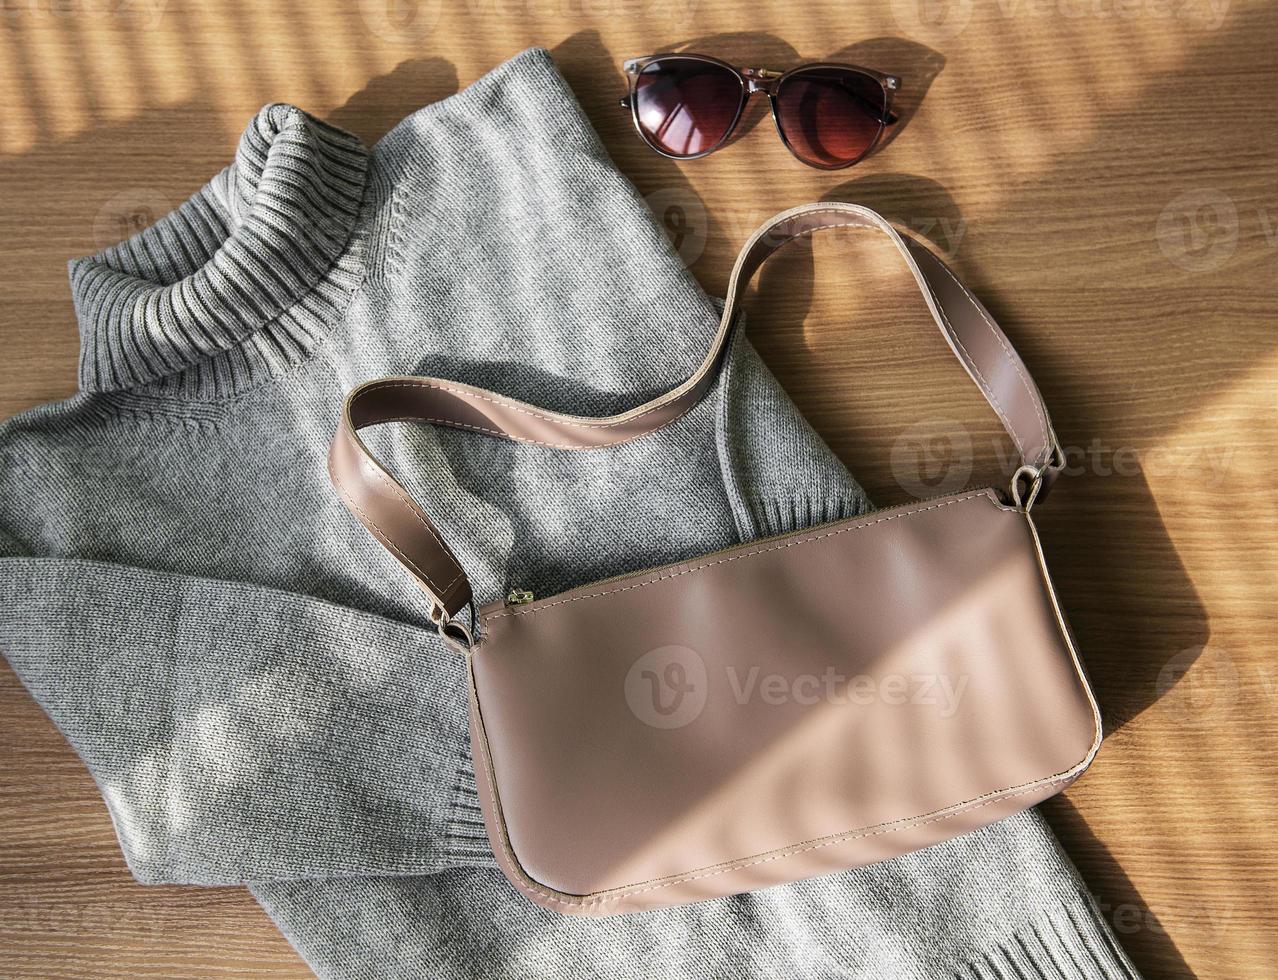 Small beige leather bag and gray women's sweater photo